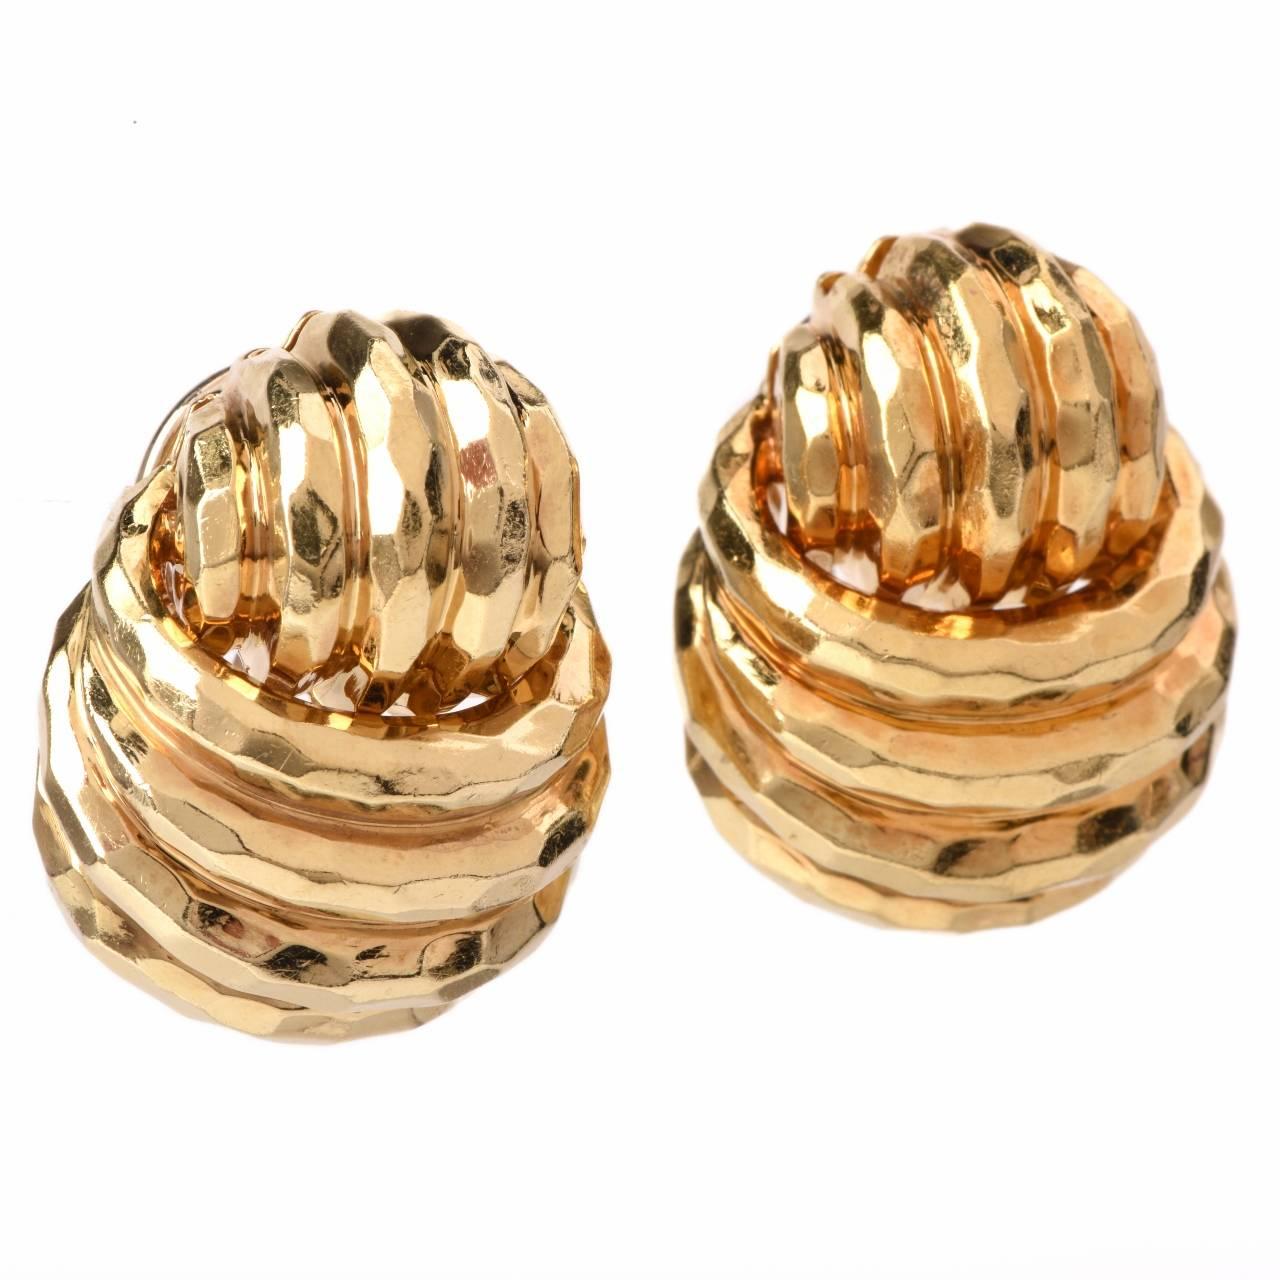 These classically elegant earrings designed by Henry Dunay are crafted in solid 18K yellow gold with artistic hammered texture, weigh 29.00 grams and measure 27 x 21 mm. Creatively designed as combination of 'swirl-and-knot' profiles embellished